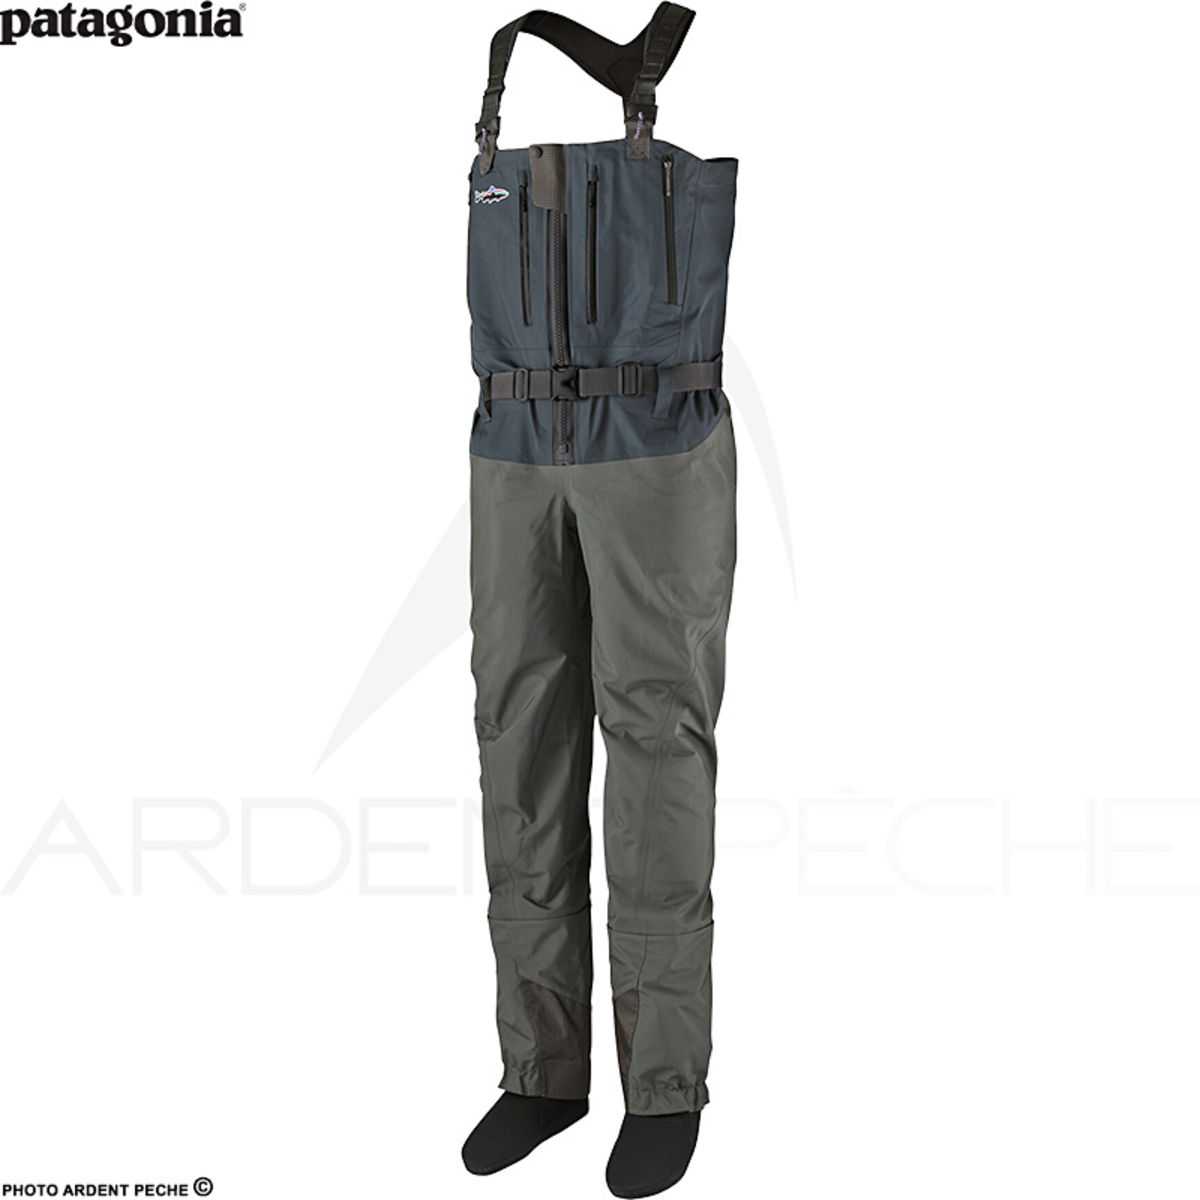 https://www.ardentflyfishing.com/Image/76531/1200x1200/waders-patagonia-swiftcurrent-expedition-zip-front-forge-grey.jpg